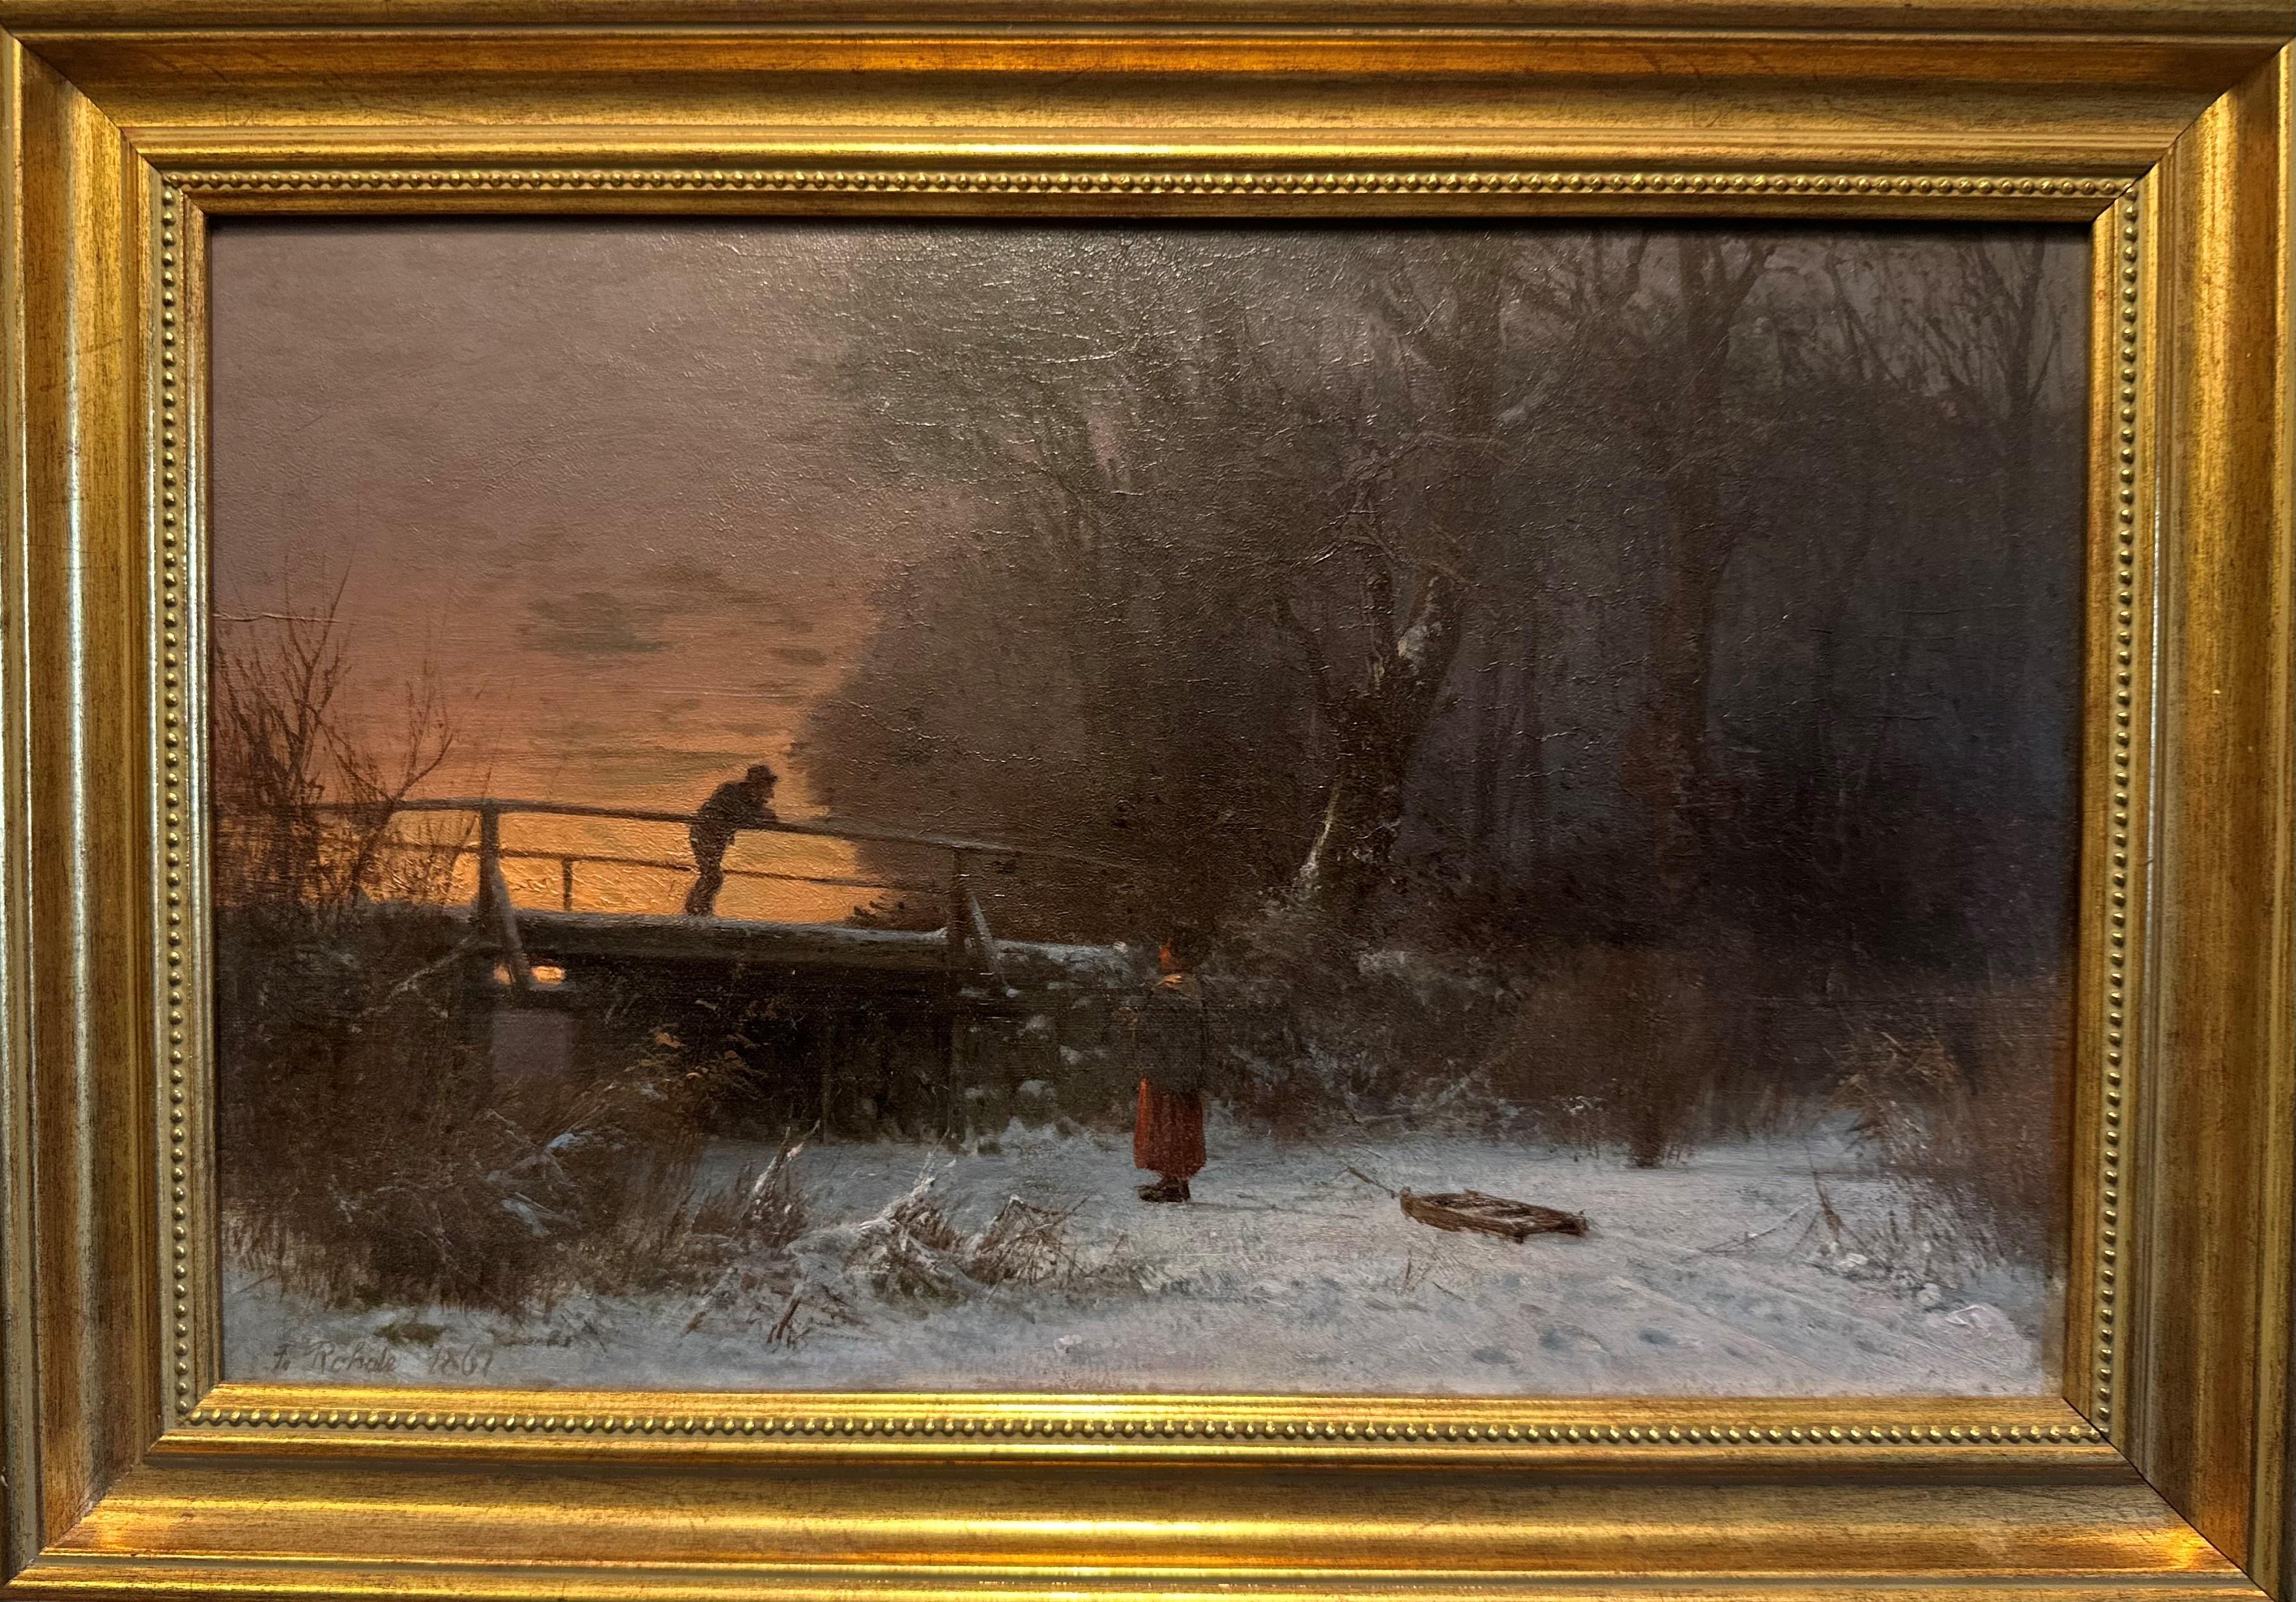 Girl with sledge by the bridge - Naturalistic Painting by Frederik Rohde